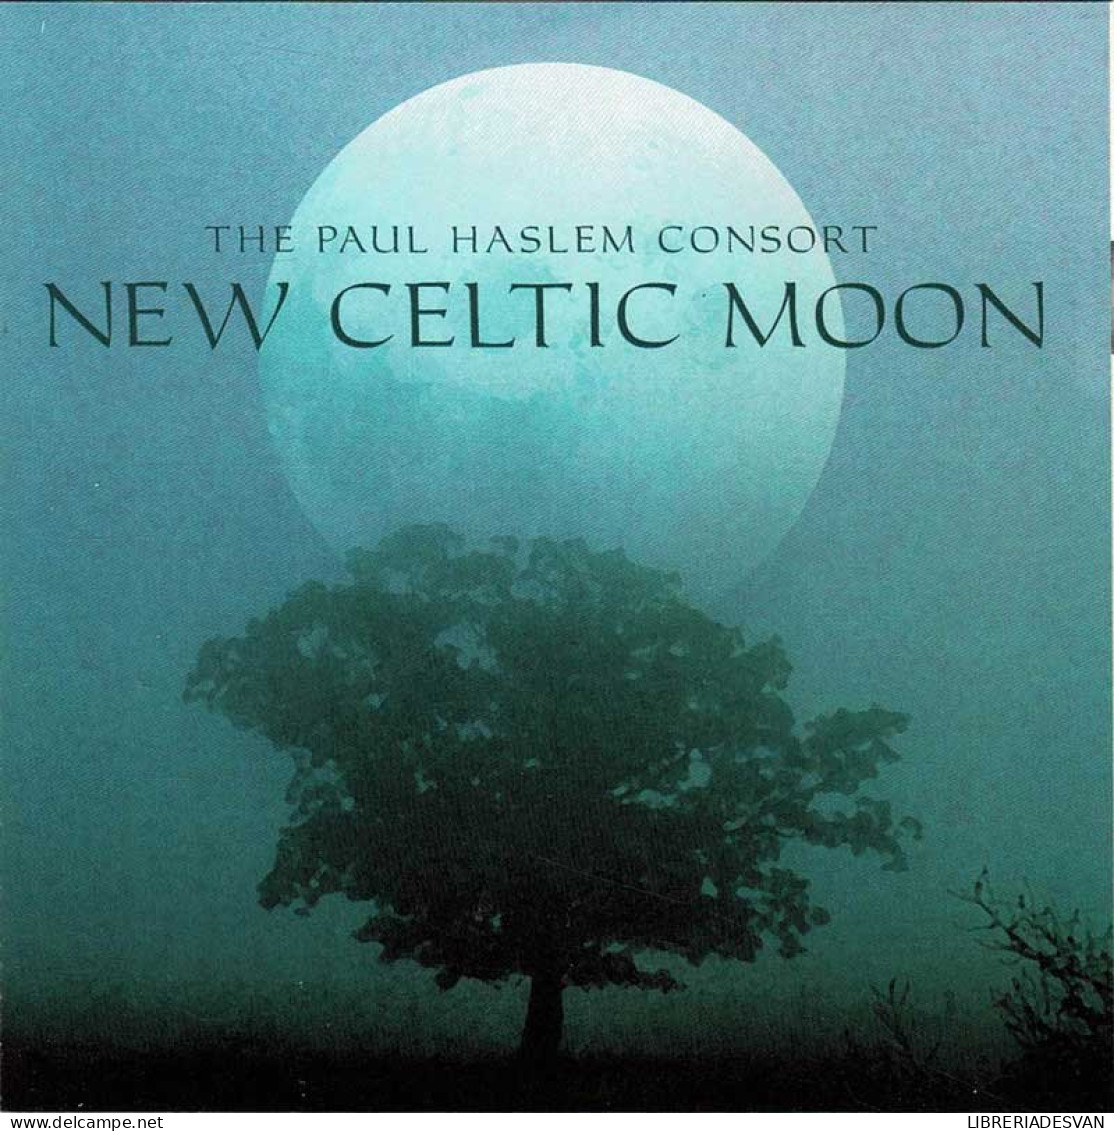 The Paul Haslem Consort - New Celtic Moon. CD - New Age